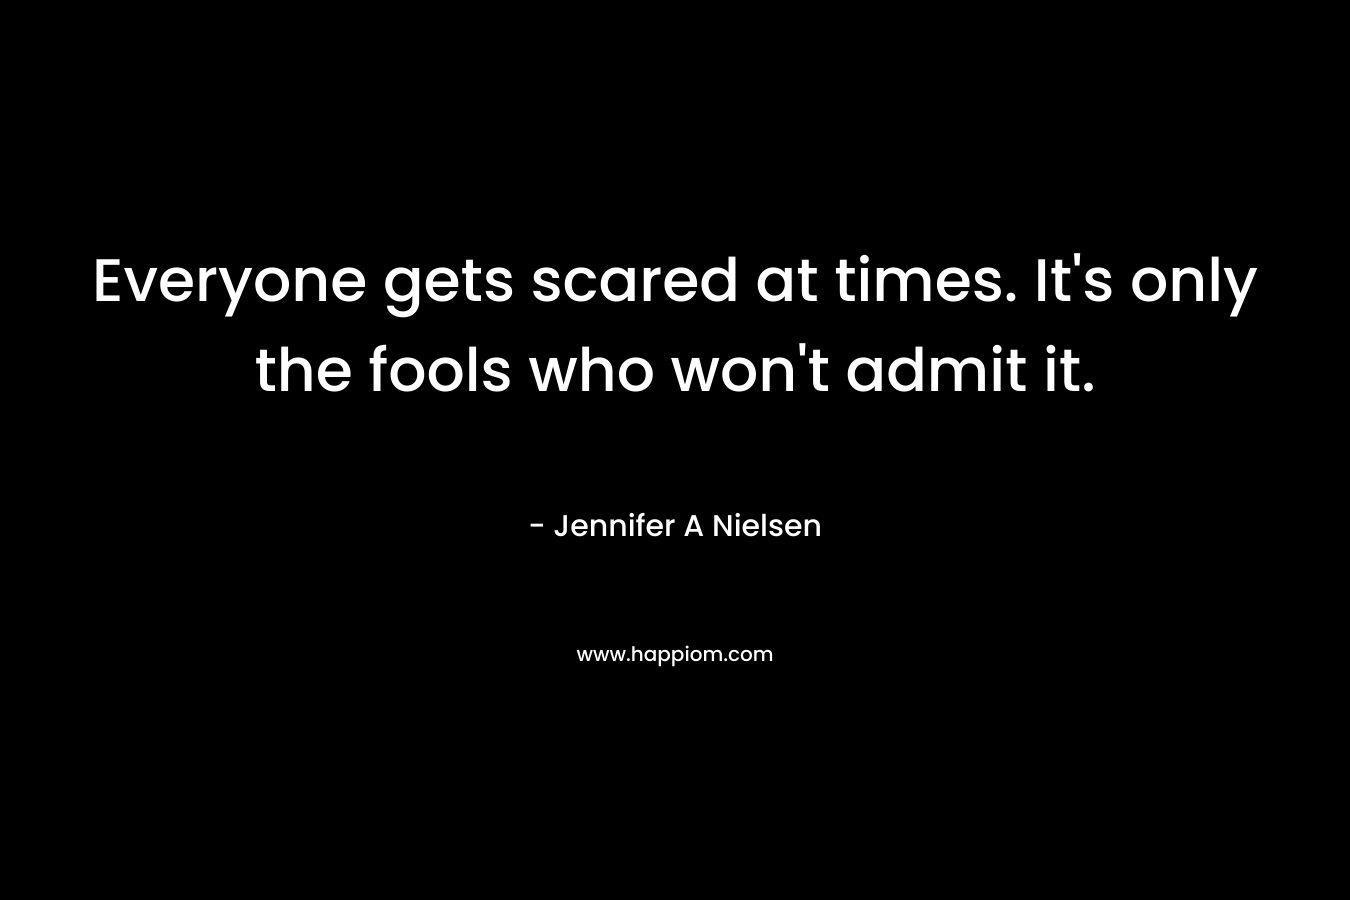 Everyone gets scared at times. It's only the fools who won't admit it.